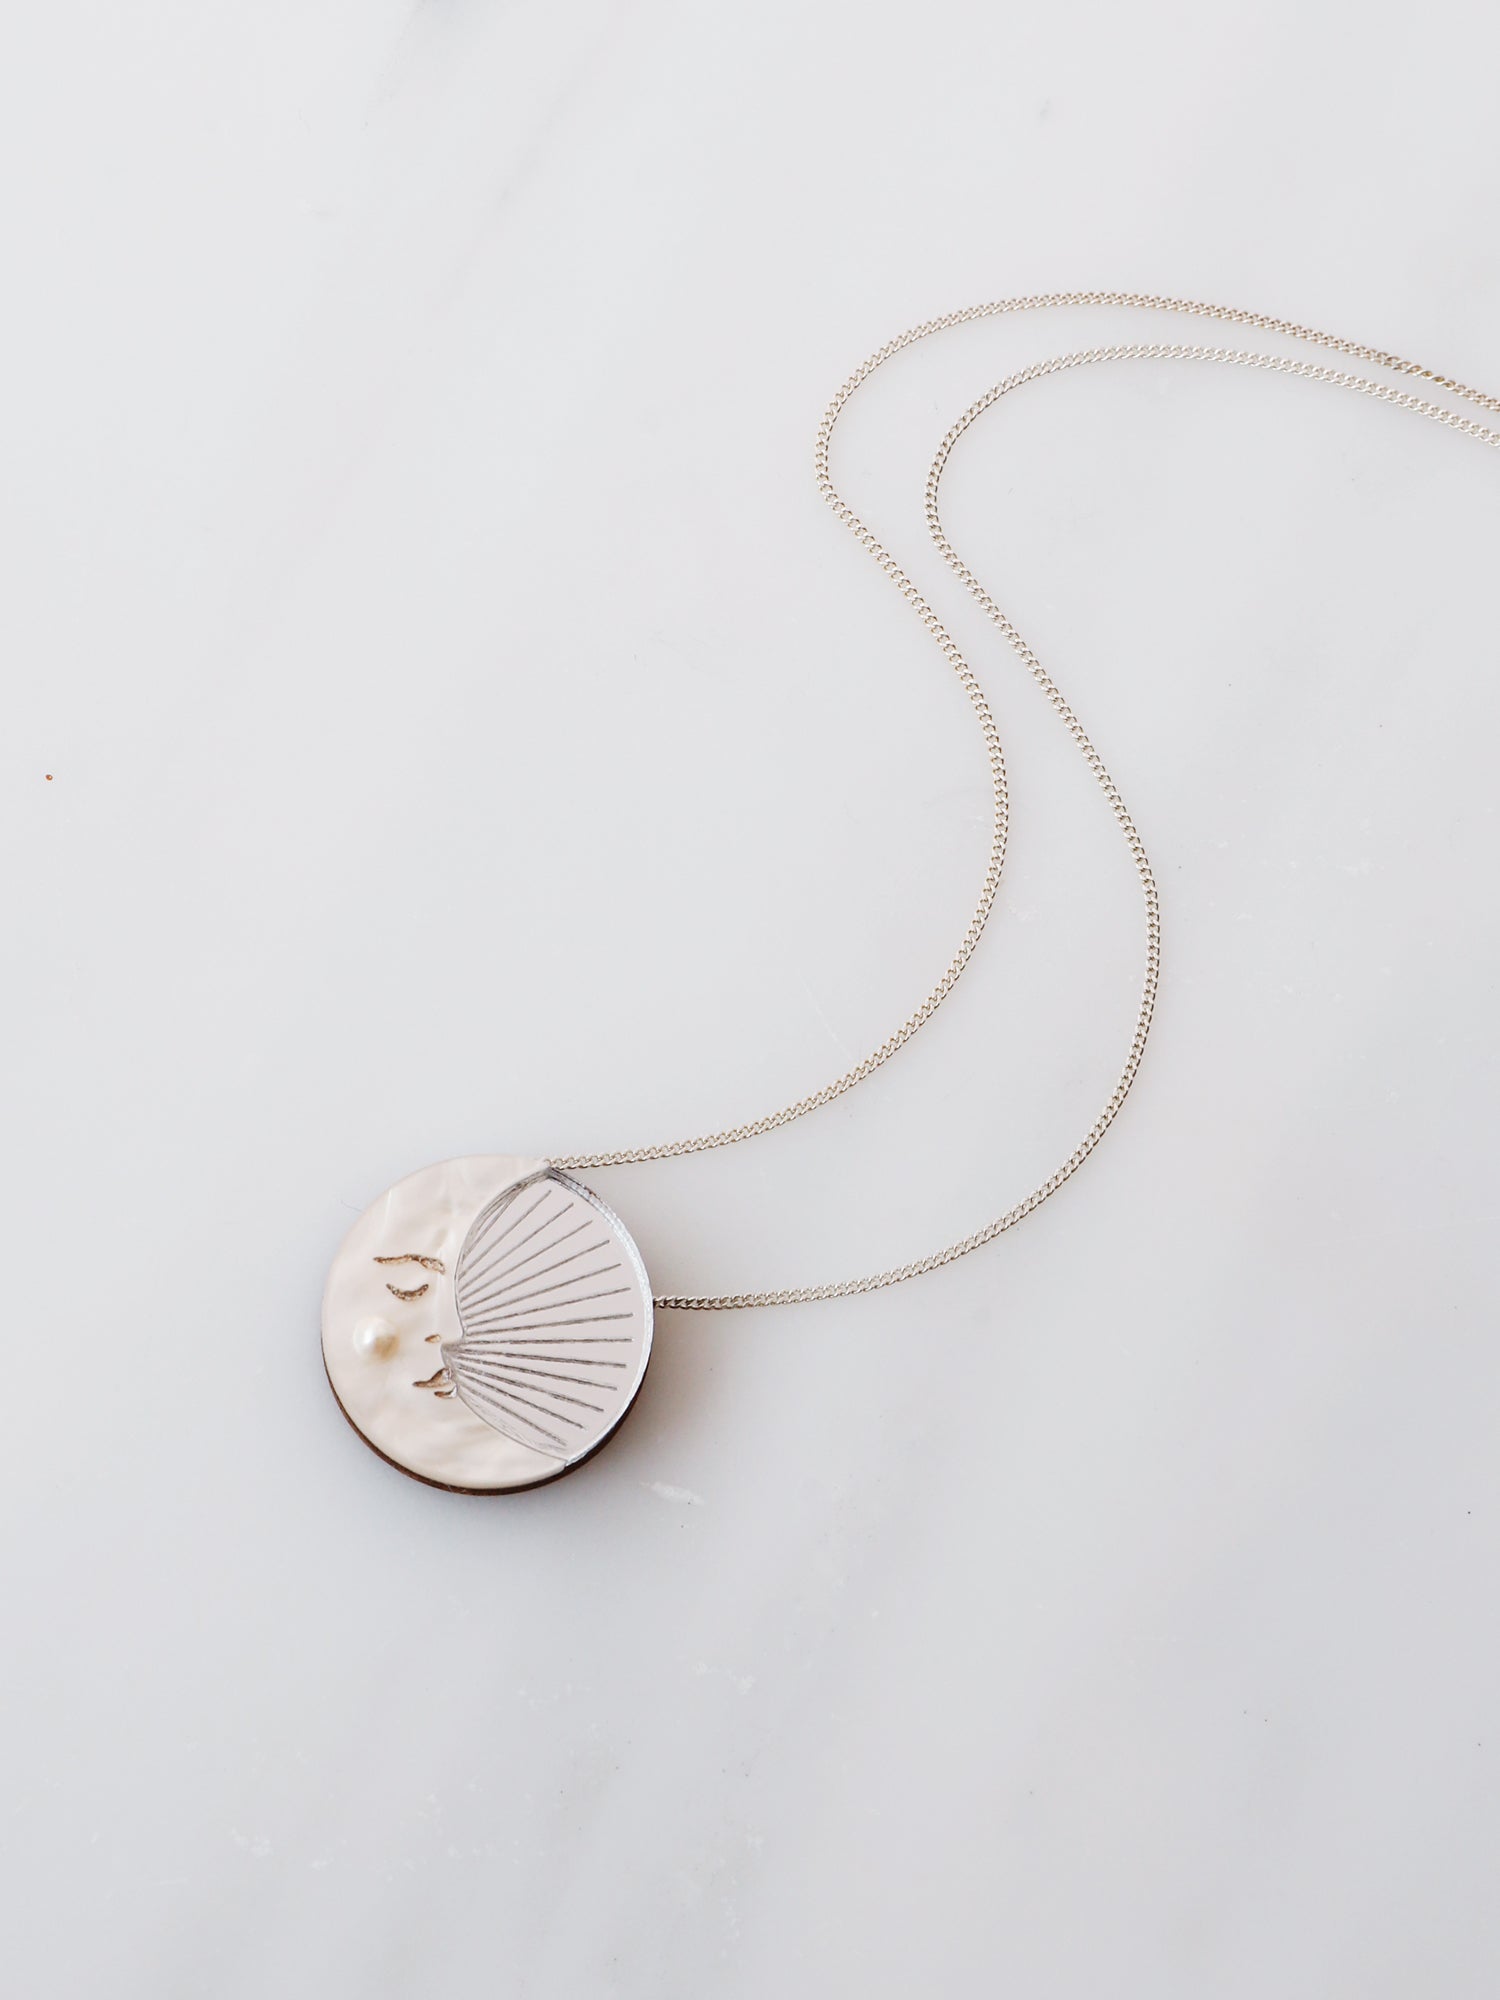 Reverie | Limited edition laser-cut jewellery | Handmade in North London.